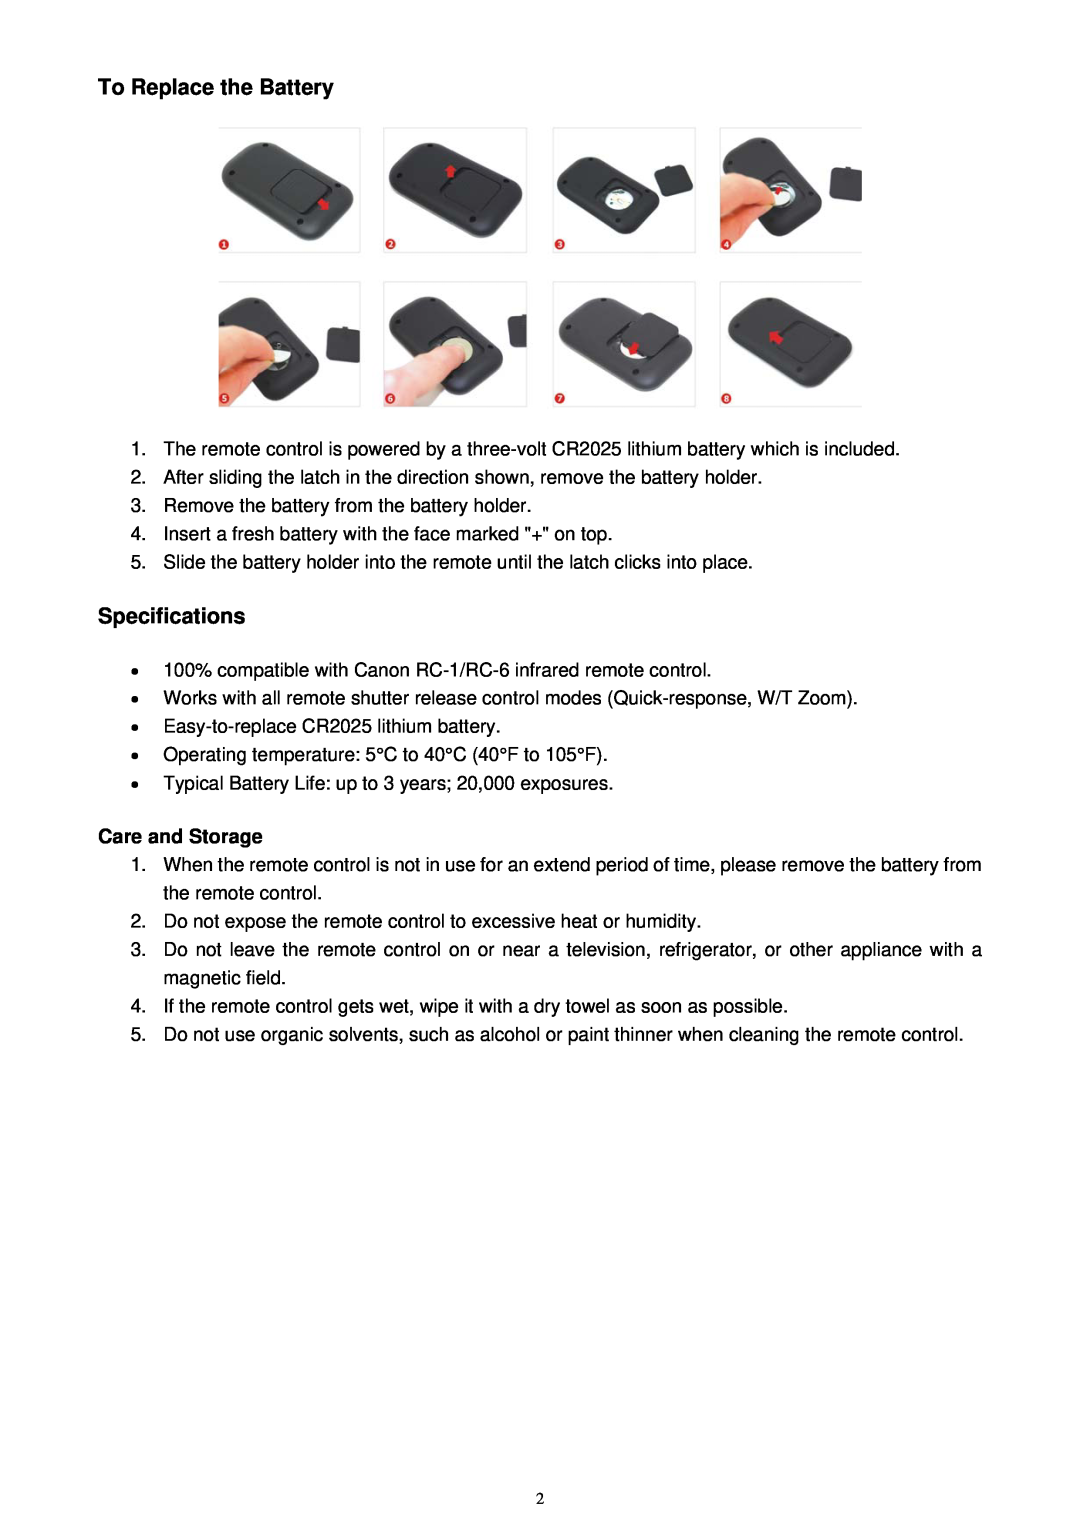 ProMaster Mic1 instruction manual To Replace the Battery, Specifications, Care and Storage 